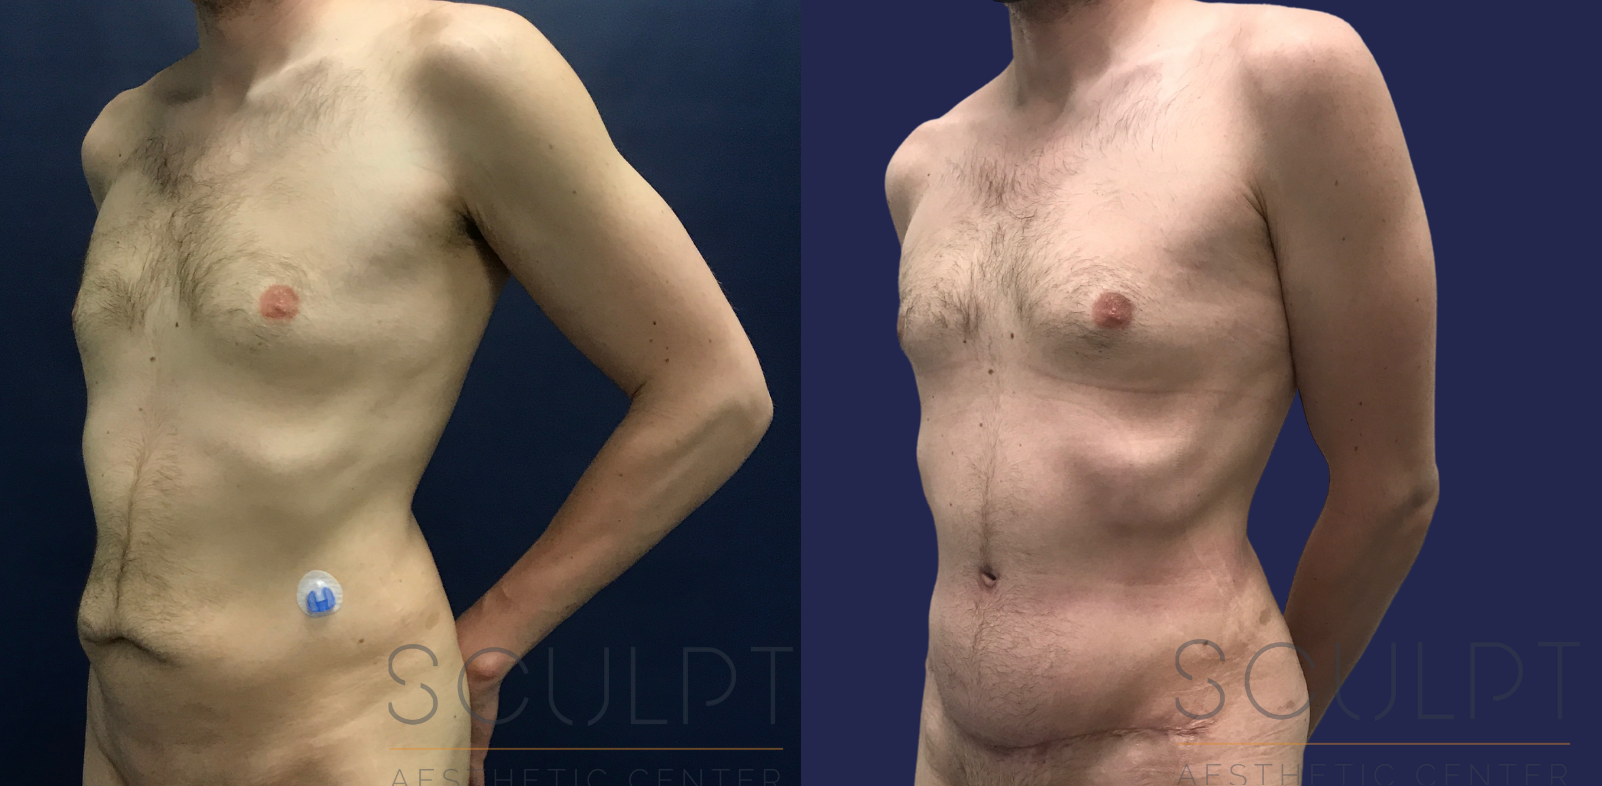 Male Tummy Tuck Before and After Photo by Sculpt Aesthetic Center in Frisco, TX